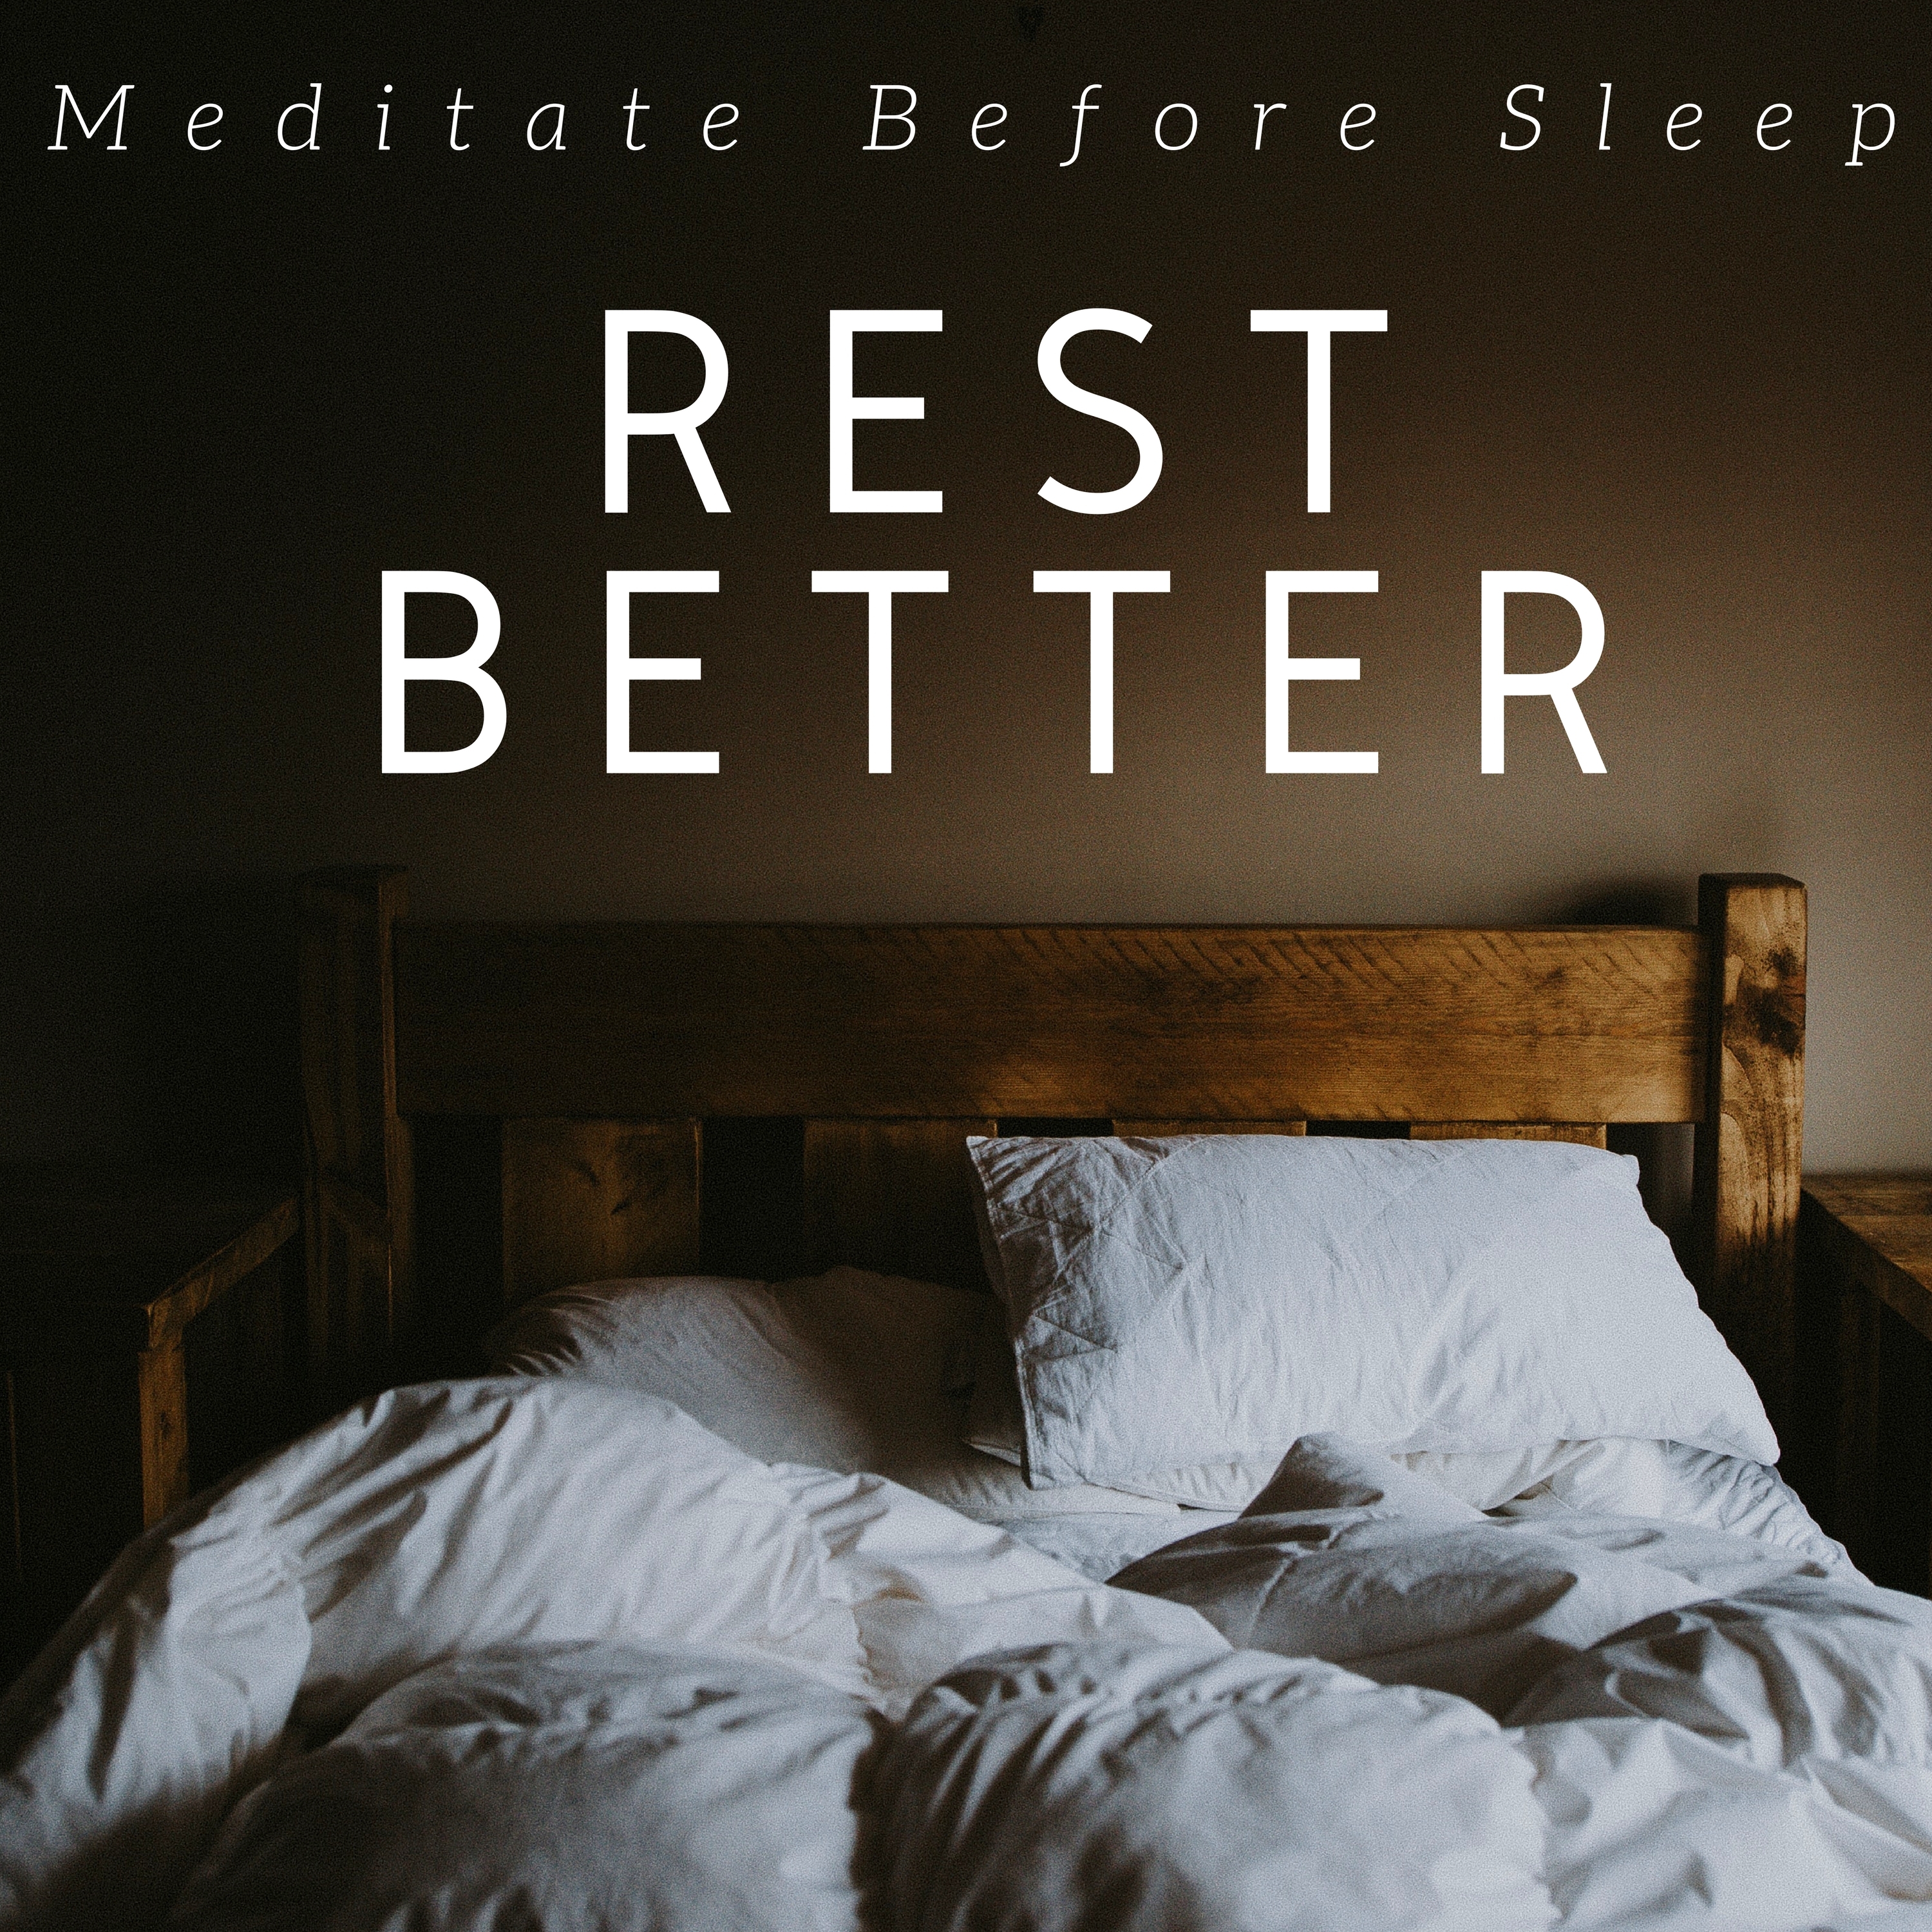 Rest Better: Meditate Before Sleep, Think Positive, Natural Sleep Aid, Sleep Therapy to Help You Relax, Nature Sounds